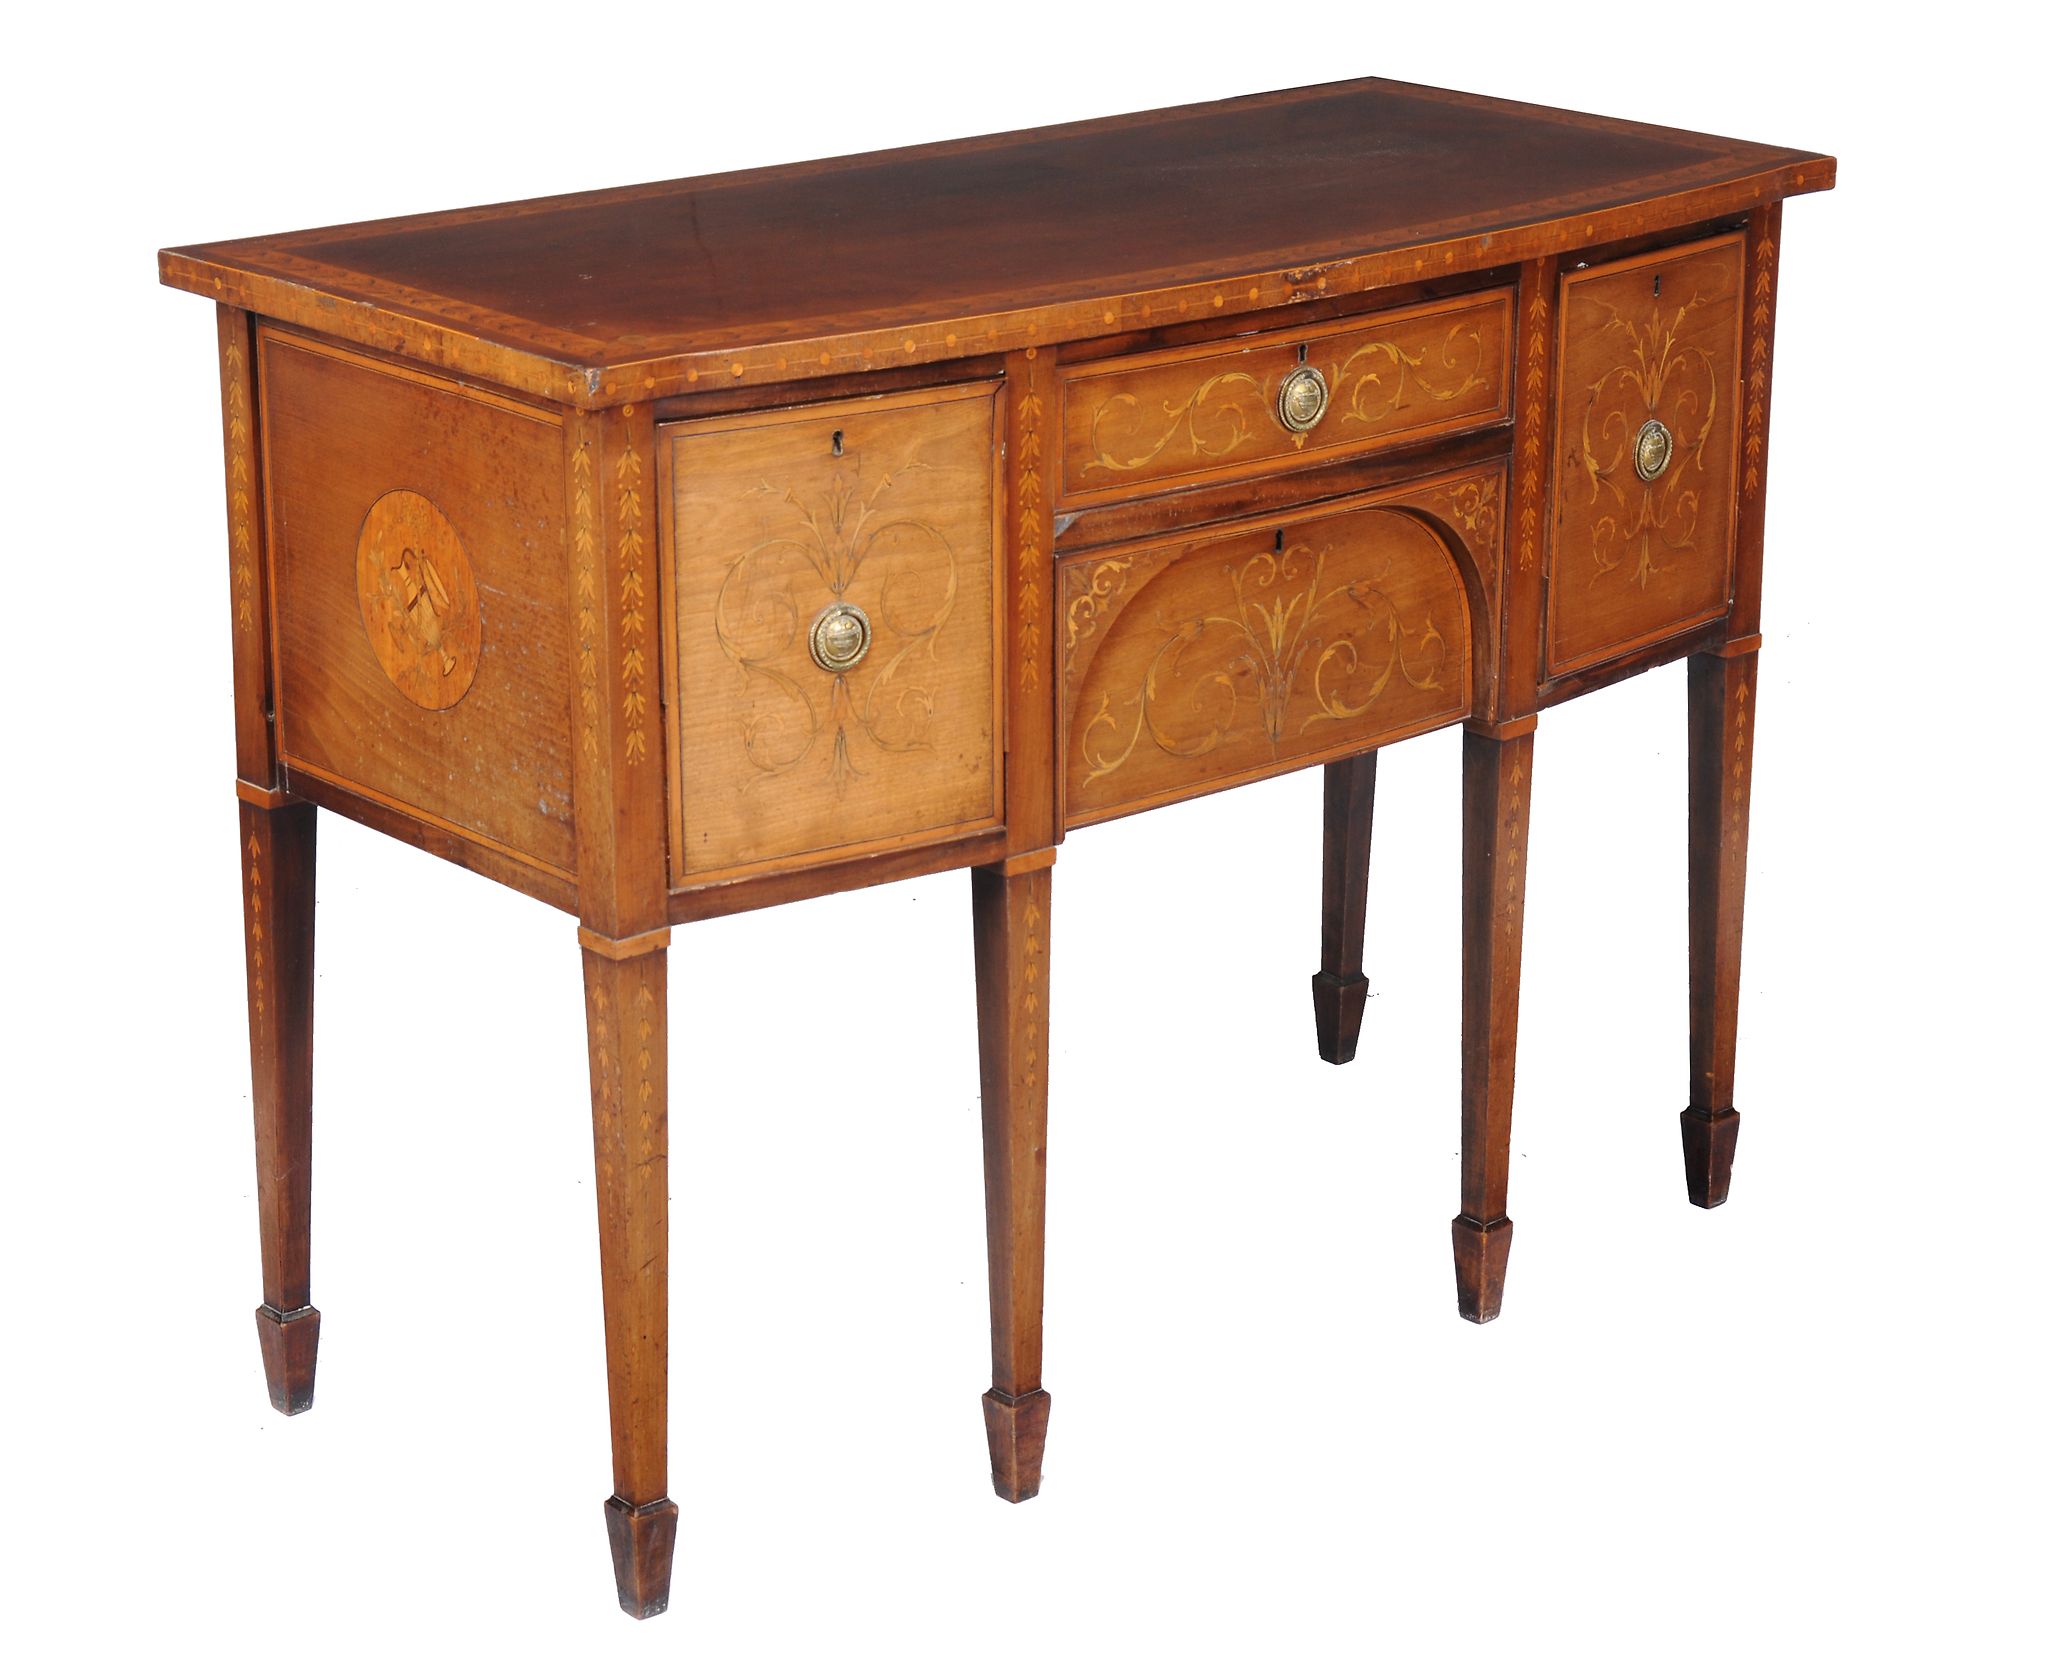 A George III mahogany and inlaid sideboard , early 19th century, of bowfront outline, in the manner - Image 2 of 2